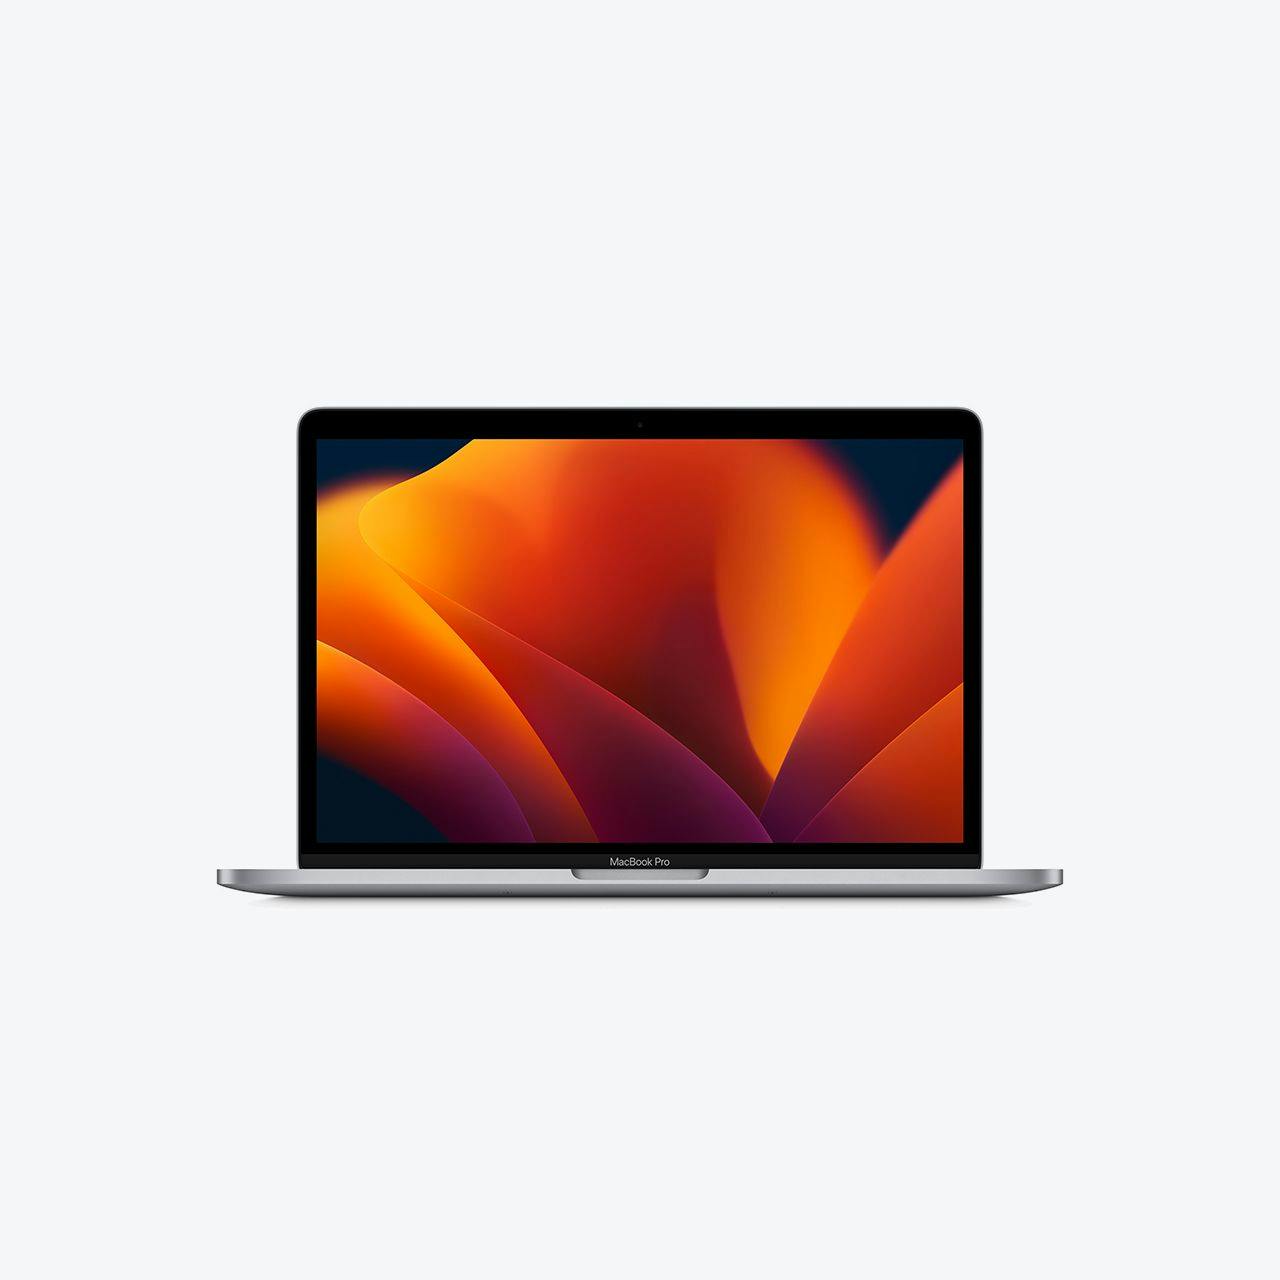 Image of a MacBook Pro (13-inch, 2017).